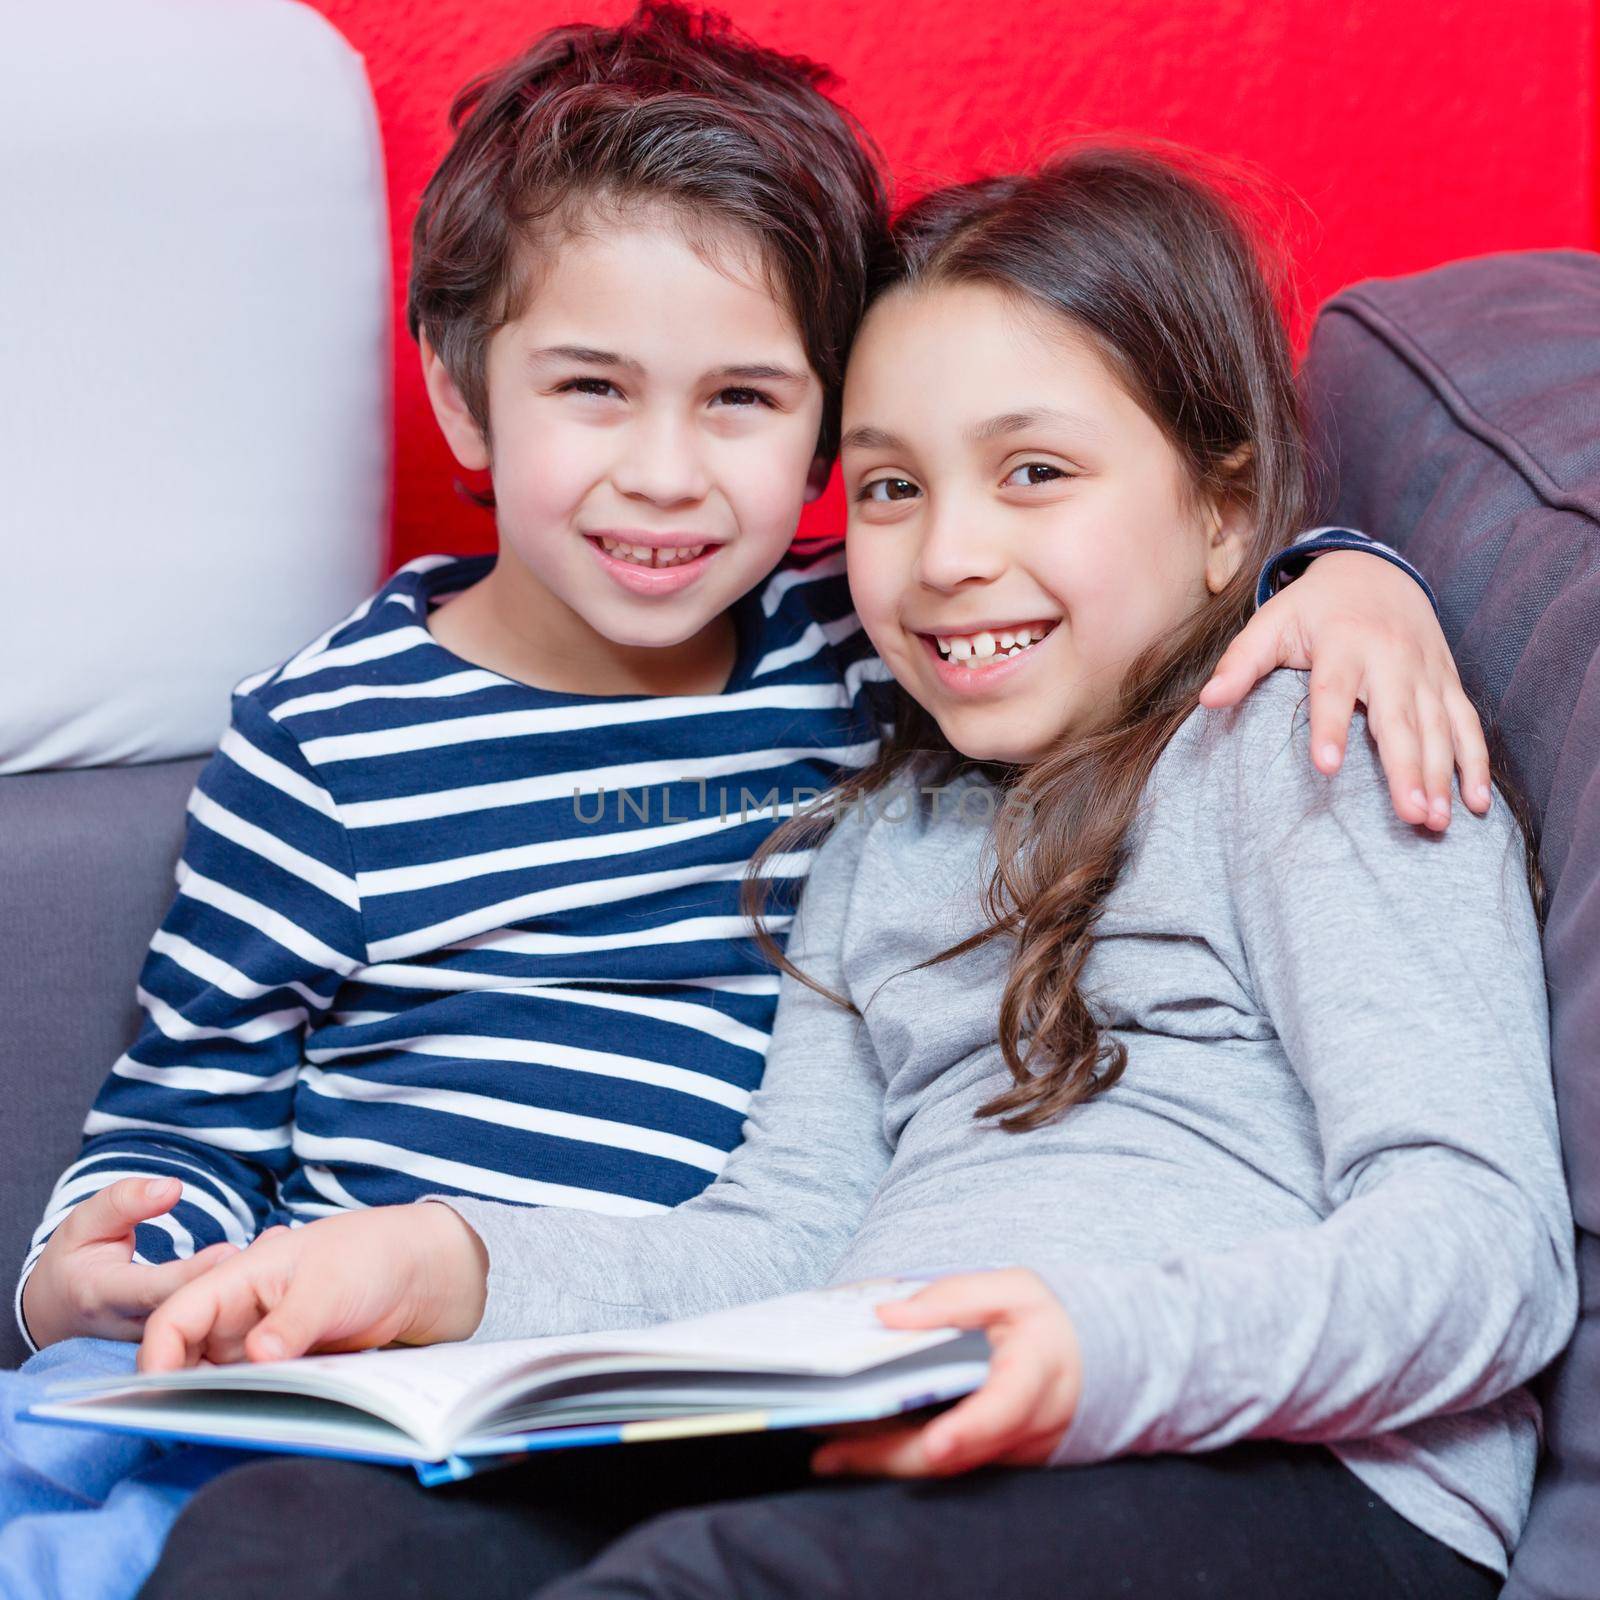 Portrait of smiling brother and sister holding story book